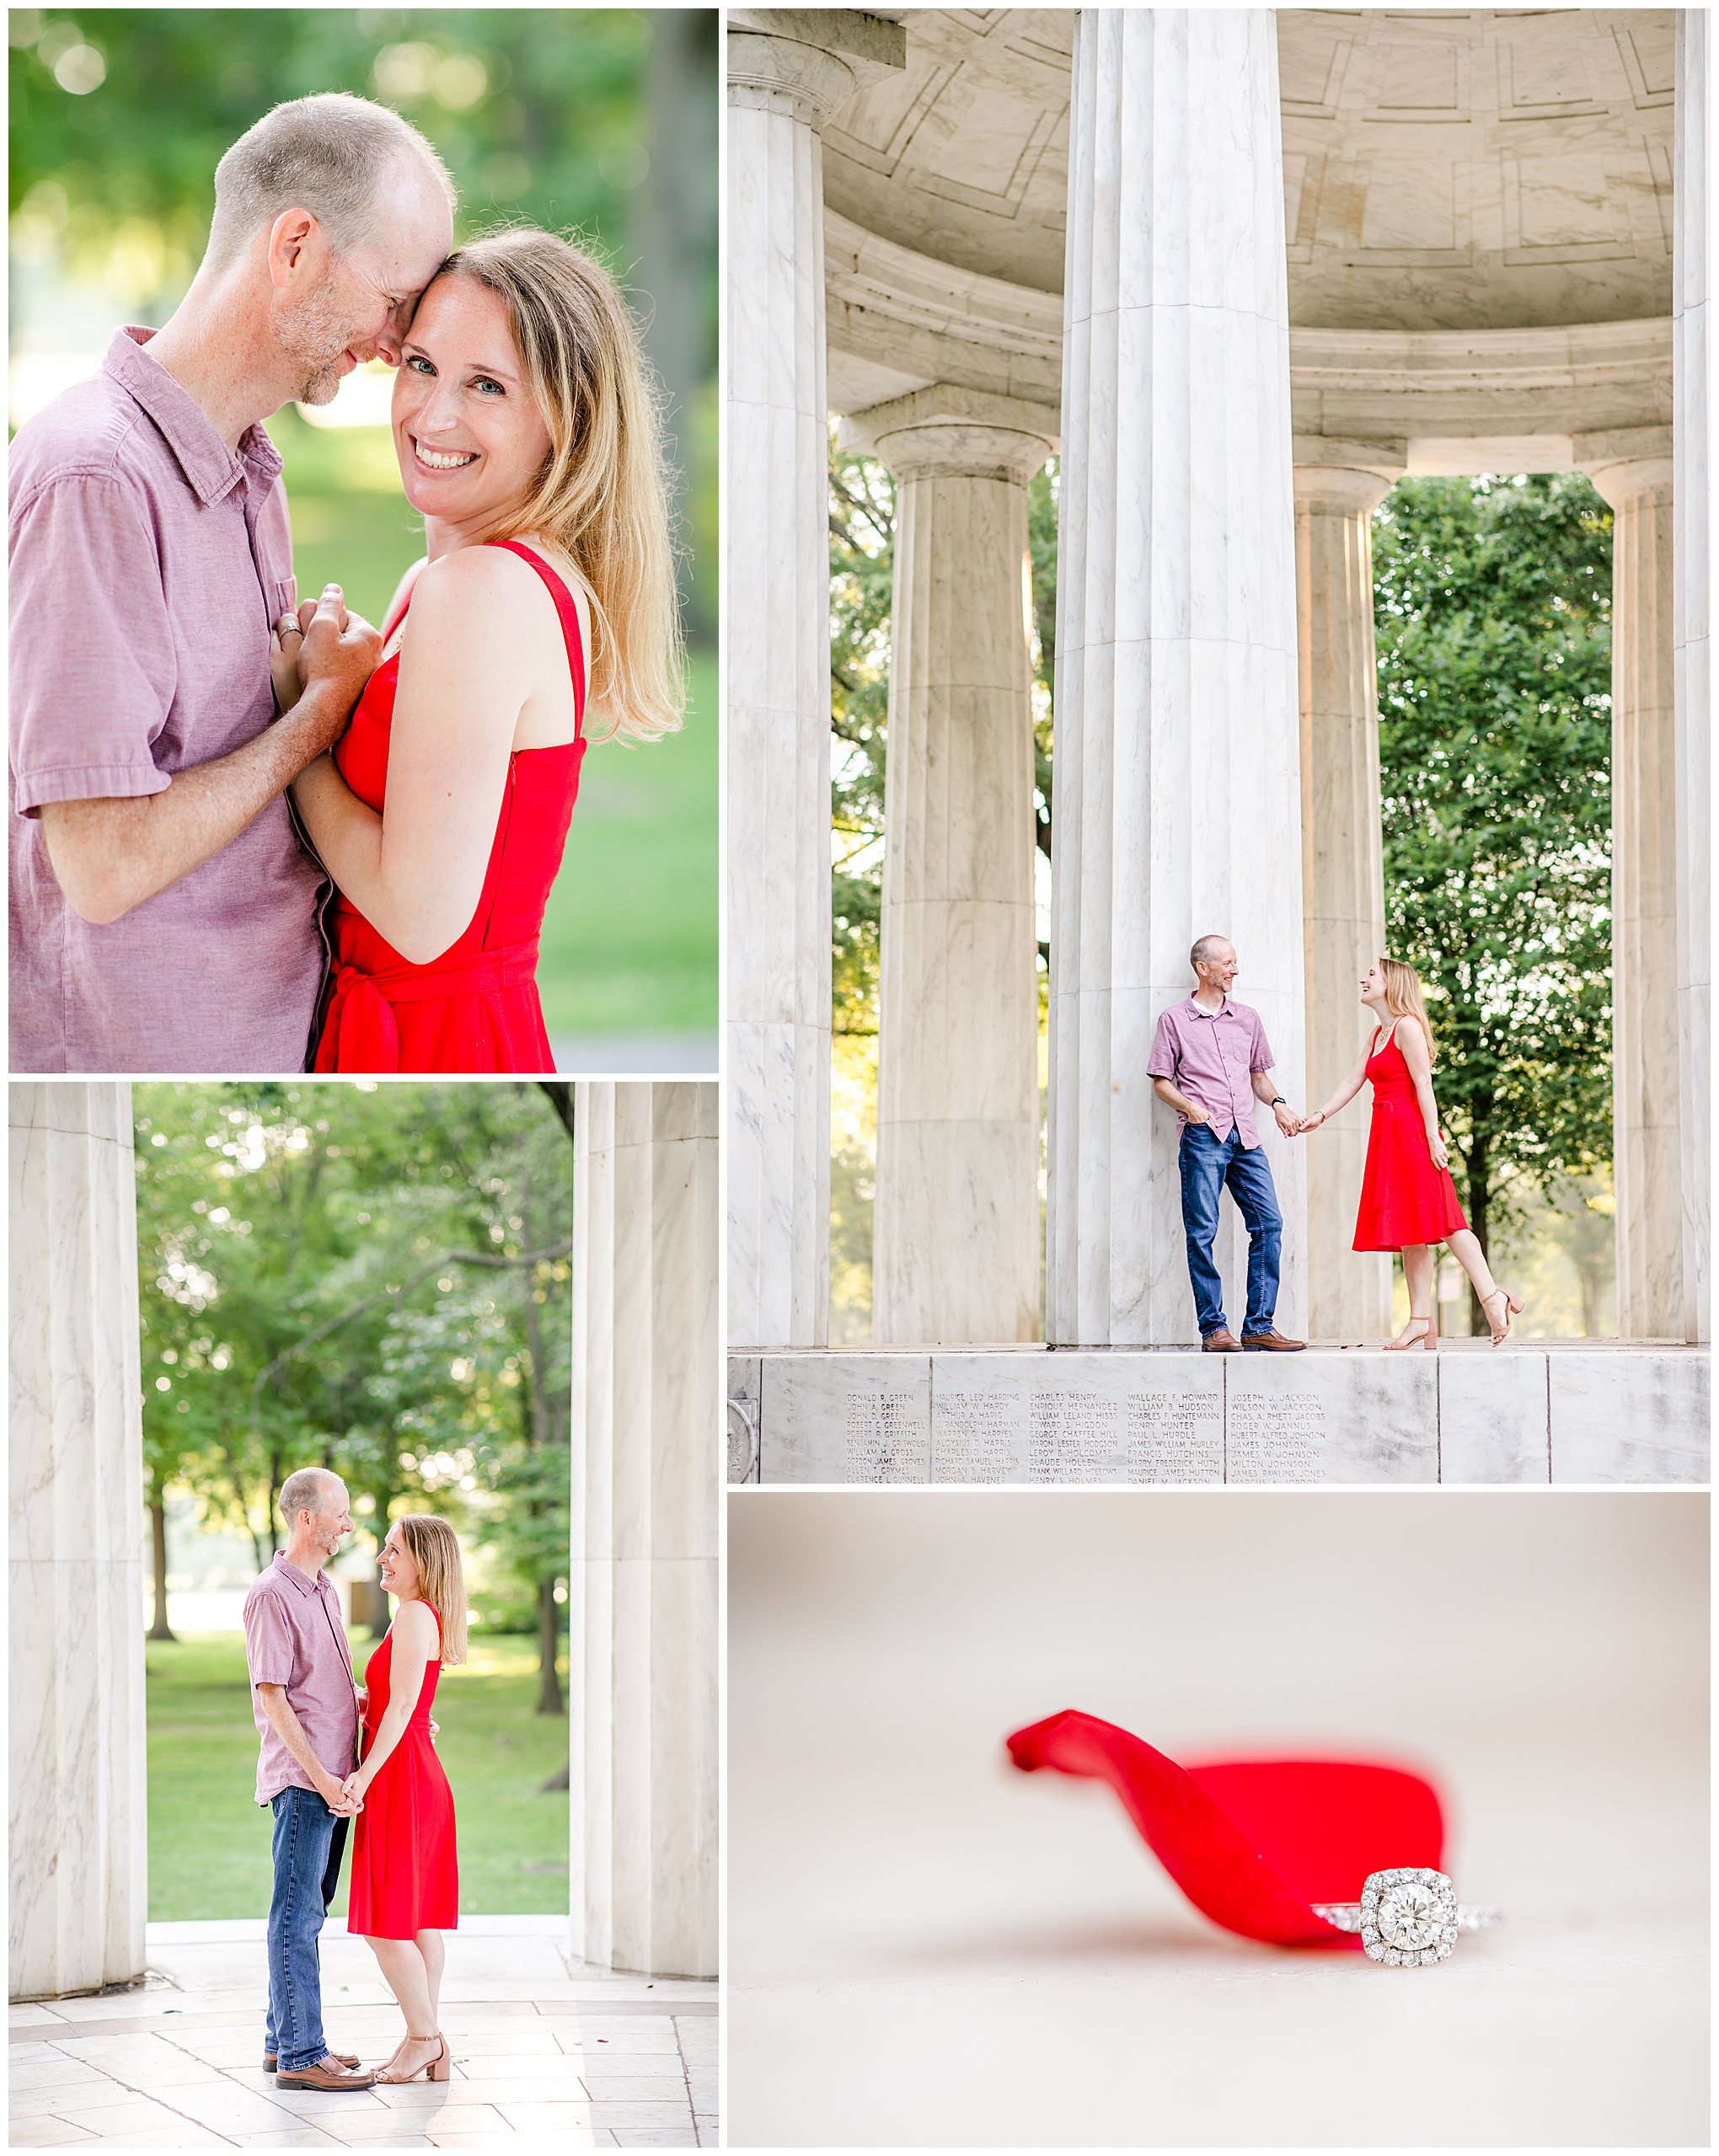 casual Lincoln Memorial engagement photos, casual engagement photos, DC engagement photos, DC engagement photographer, DC wedding photographer, natural light engagement photos, National Mall engagement photos, Rachel E.H. Photography, summer engagement photos, DC couple, red white and blue aesthetic, DC War Memorial, diamond halo engagement ring